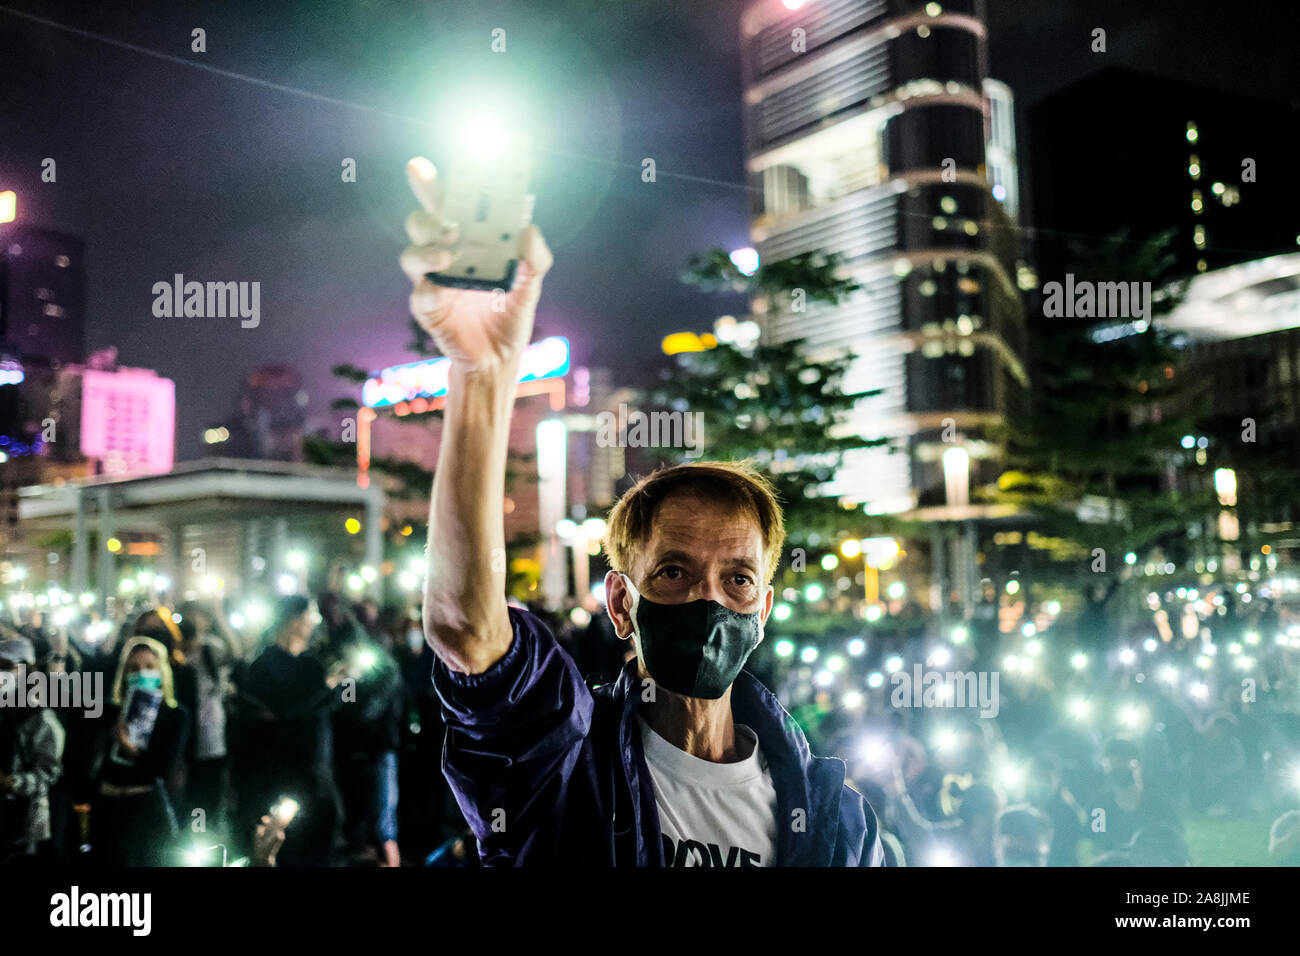 A man holds up his smartphone light during the rally.Memorial rally at Tamar Park in Hong Kong to mourn the death of a 22 years old university student, Alex Chow Tsz Lok who died from a serious brain injury during a fall on November 4th as police skirmished with demonstrators last weekend. He was left in critical condition and died after suffering a cardiac arrest. Stock Photo